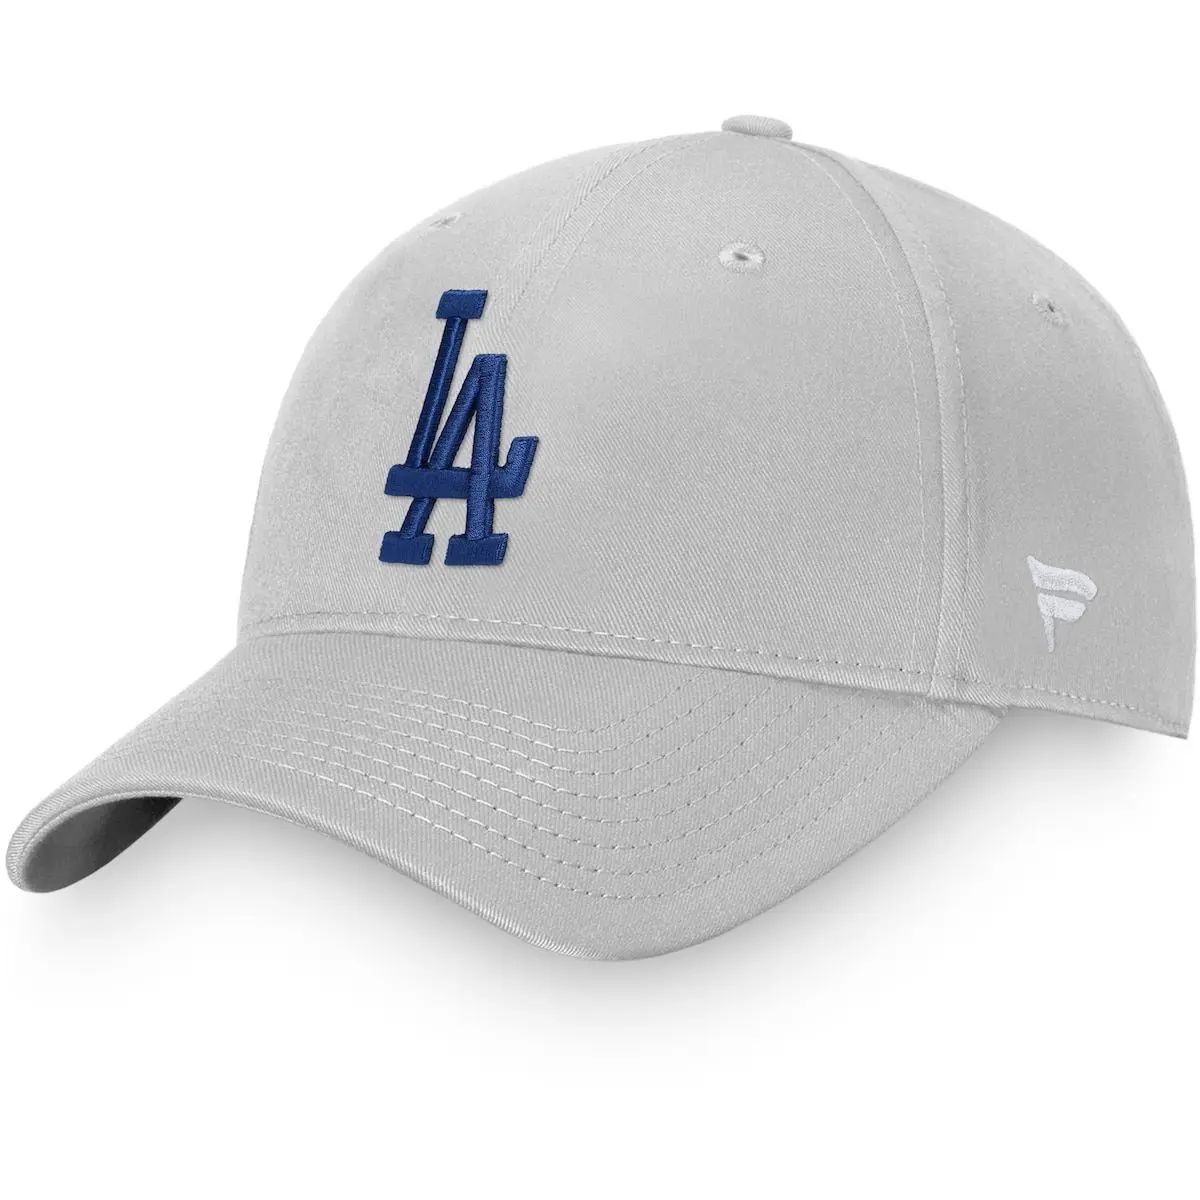 Men's Fanatics Branded Gray Los Angeles Dodgers Core Snapback Hat at Nordstrom, Size One Size Oz | Nordstrom